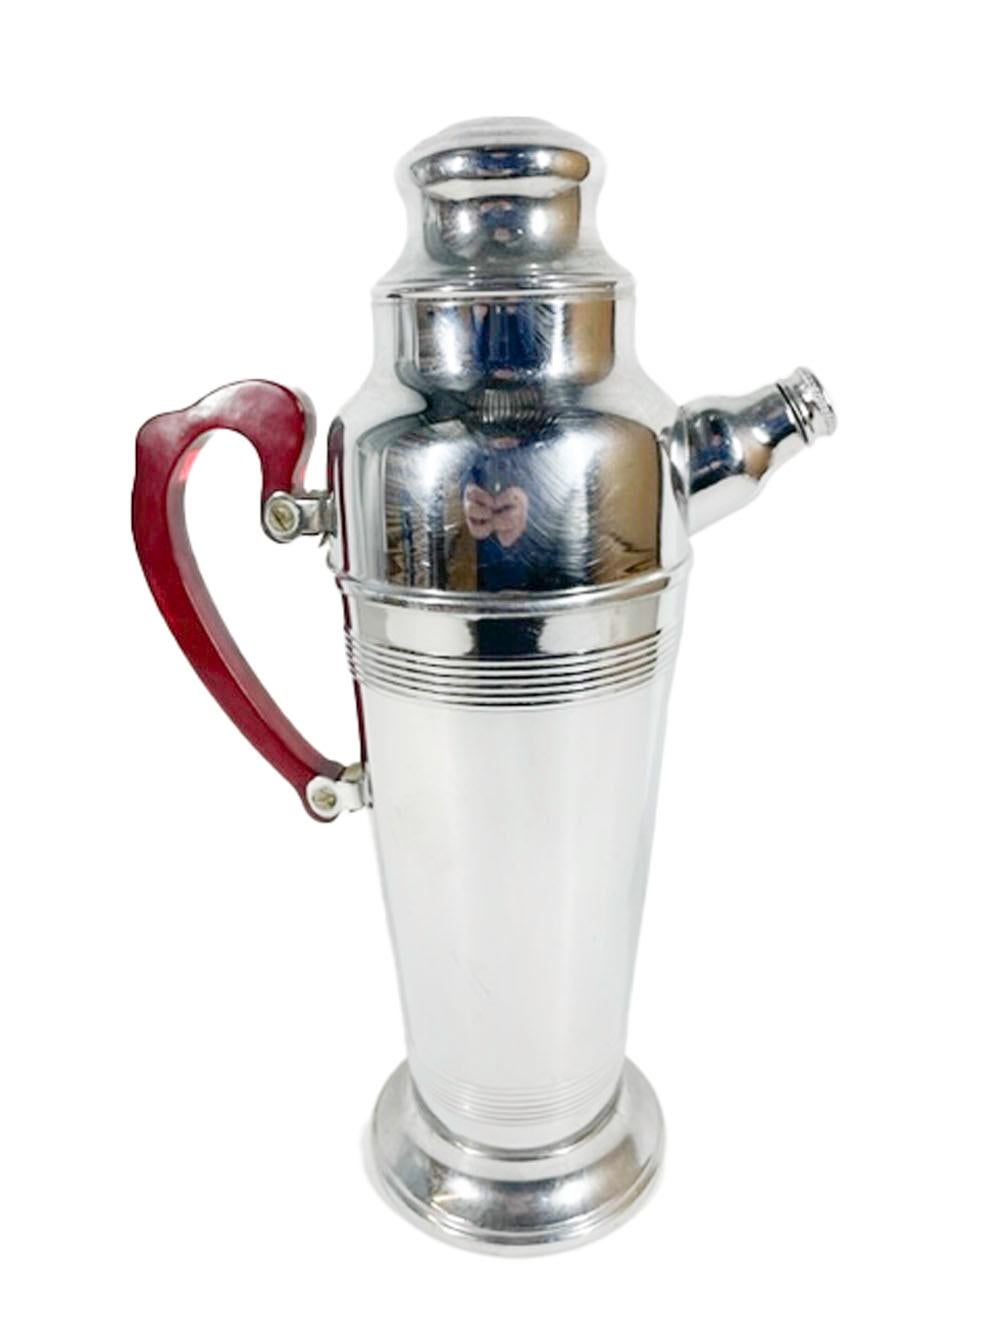 20th Century Art Deco Urn-Form Chrome Cocktail Shaker with Reeded Bands and Red Lucite Handle